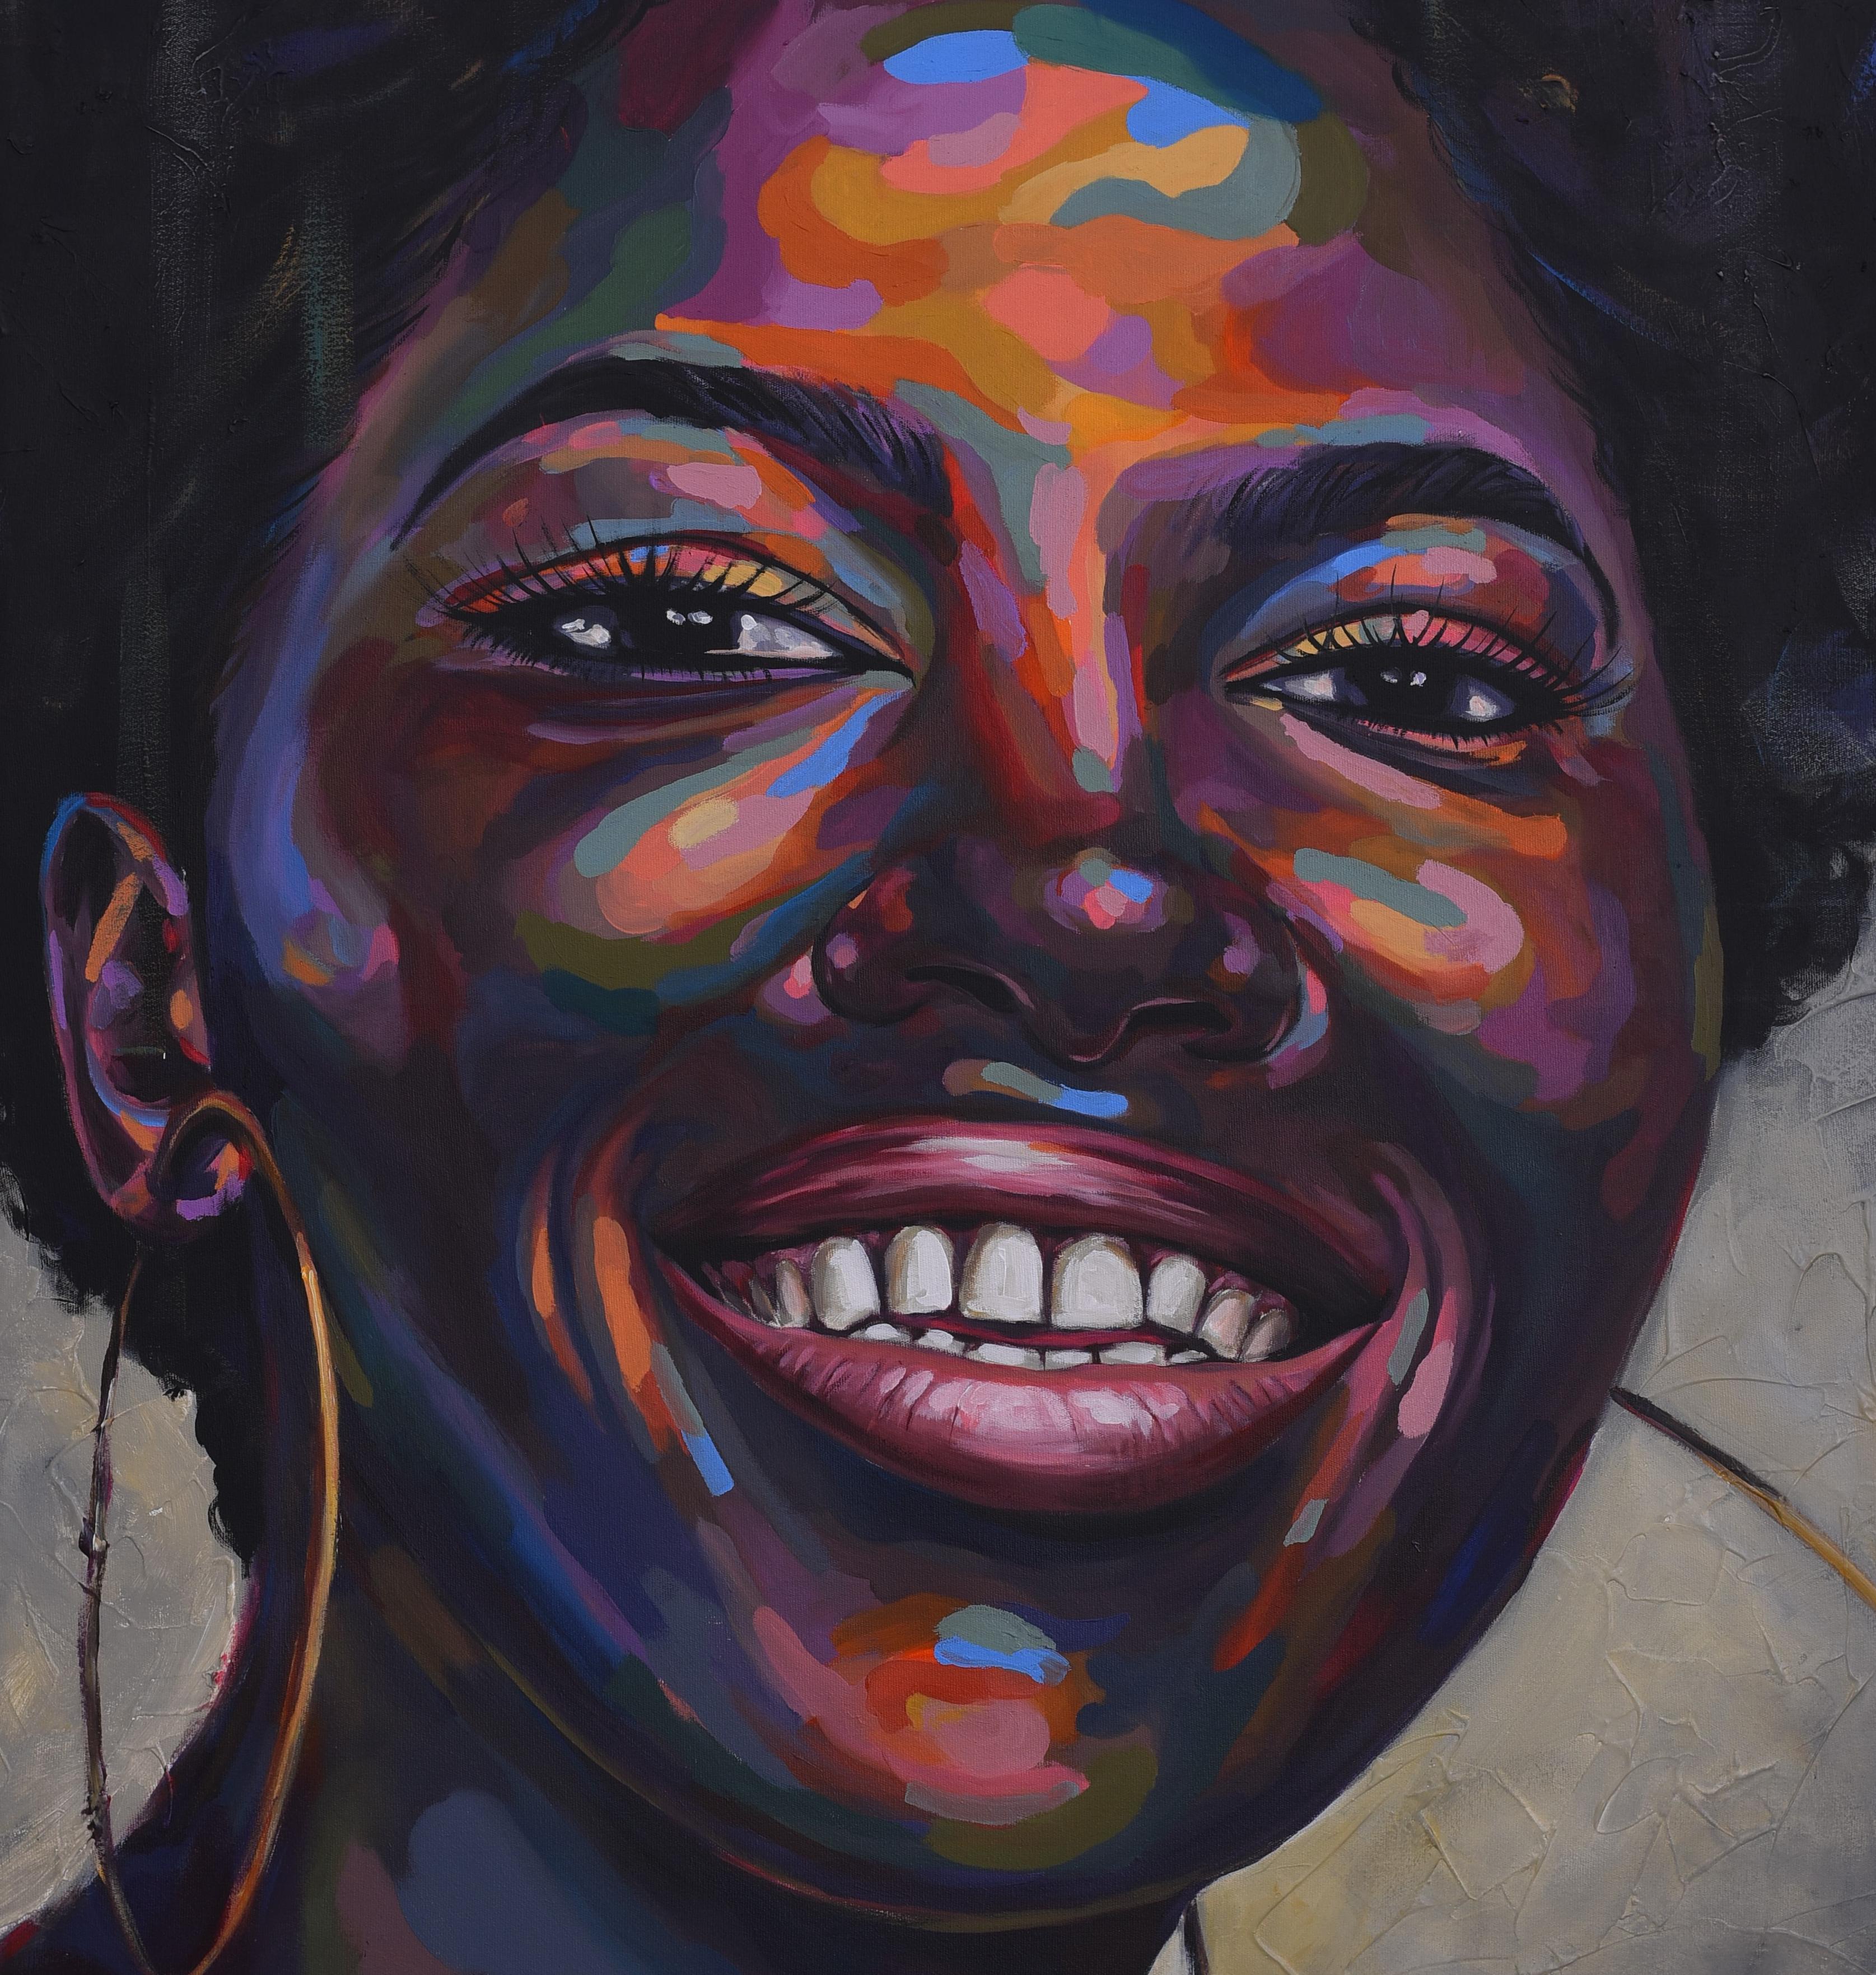 The face of this black woman shows the expression of victory, success, and triumph.

As humans, it is inevitable sometimes to experience difficulties, but this period strengthens us and prepares us for the greater future.

This is always a reminder